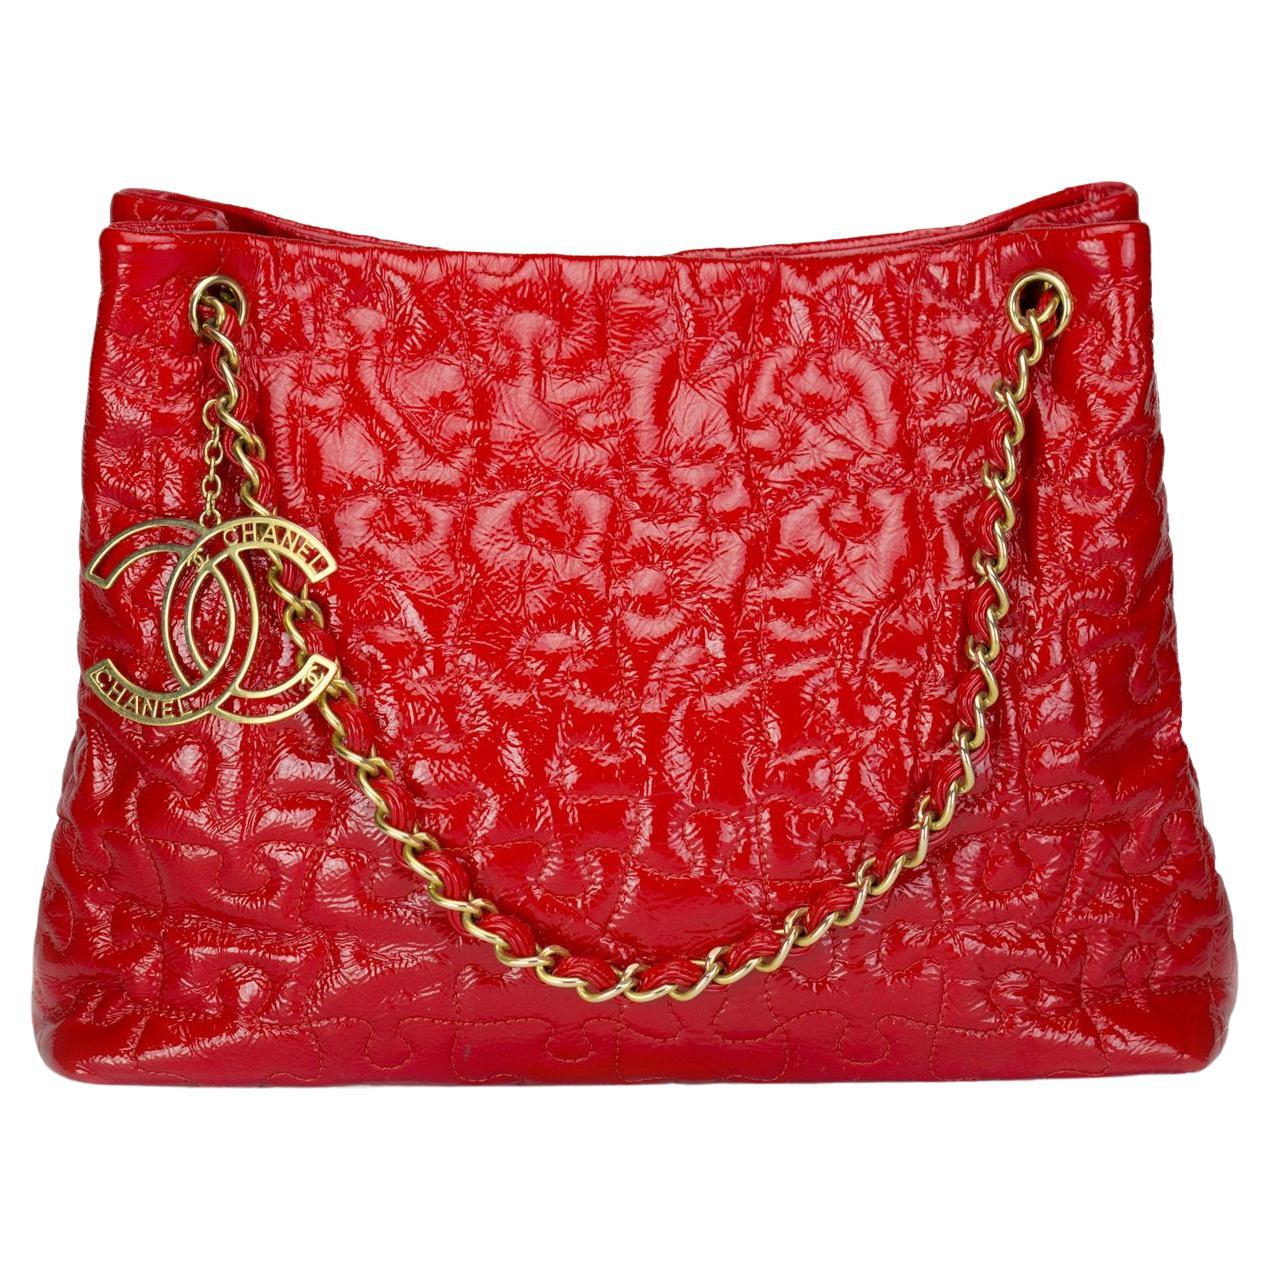 Chanel Rare Vintage Red Puzzle Piece Patent Tote